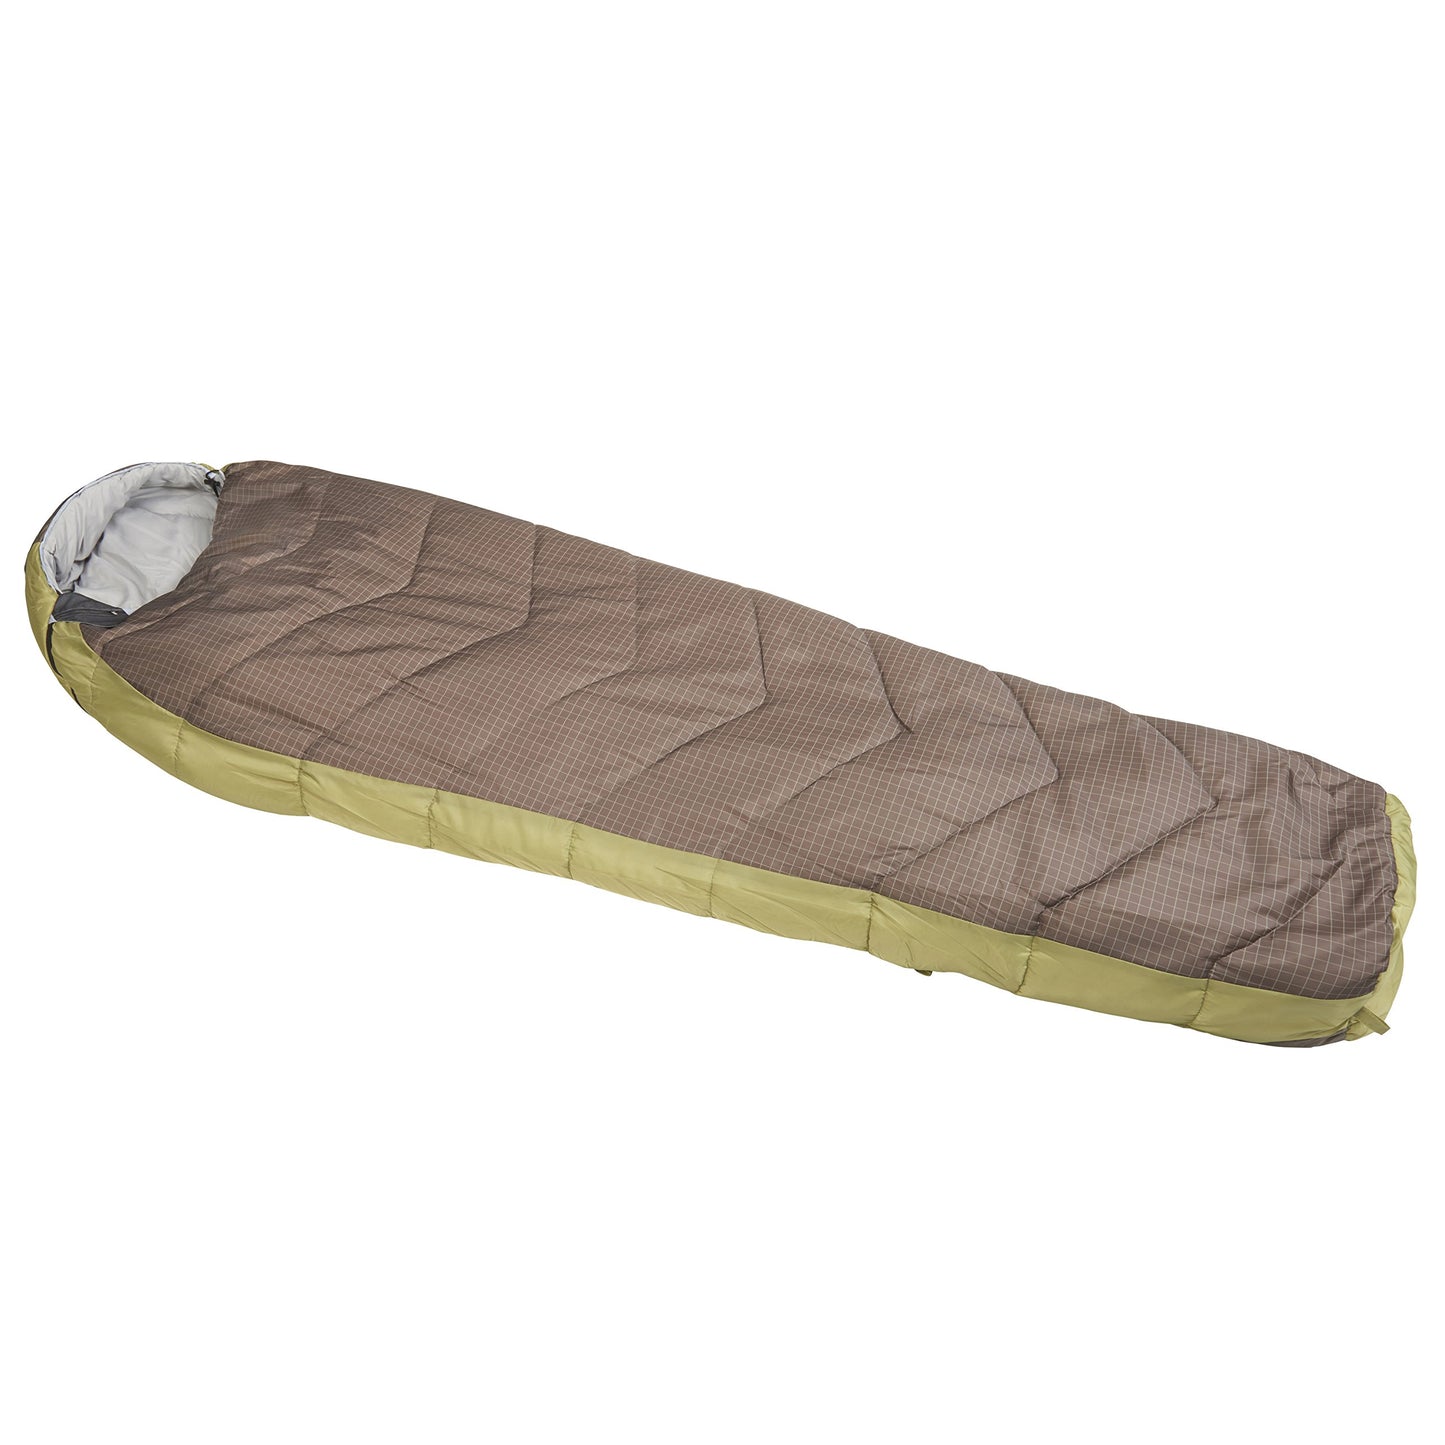 Suisse Sport Alpine Adult Mummy Double Layer Sleeping Bag 33 x 24 x 84 inches , Brown